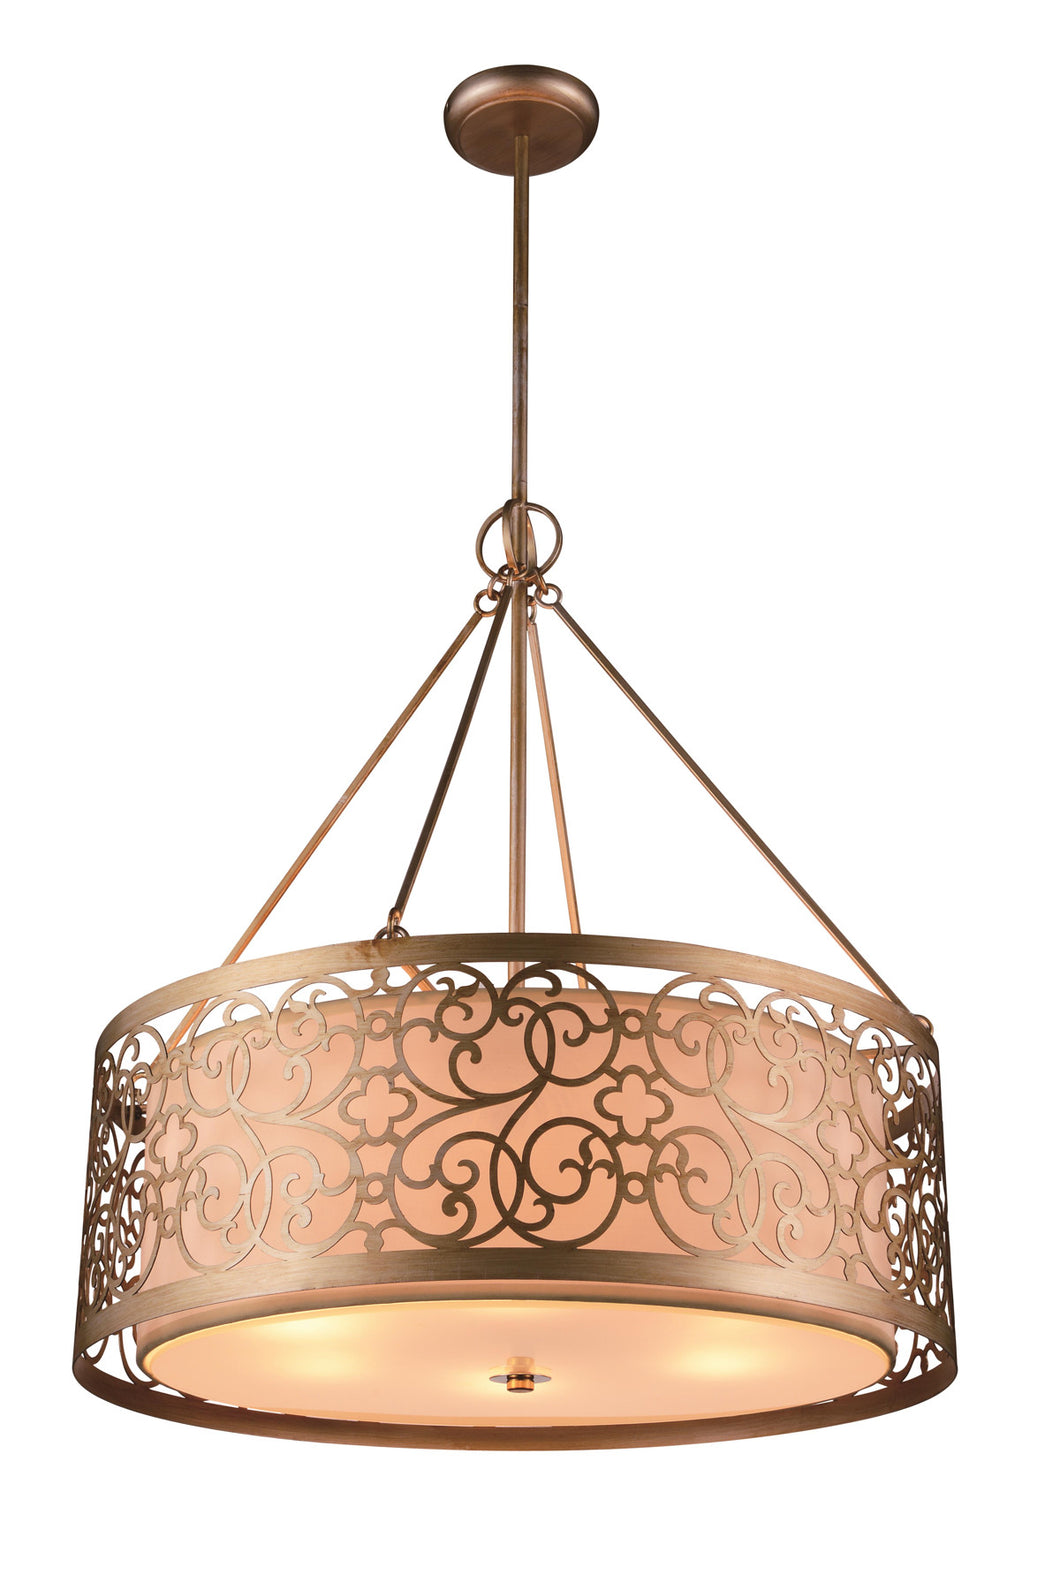 4 Light Drum Shade Chandelier with Rubbed Silver finish